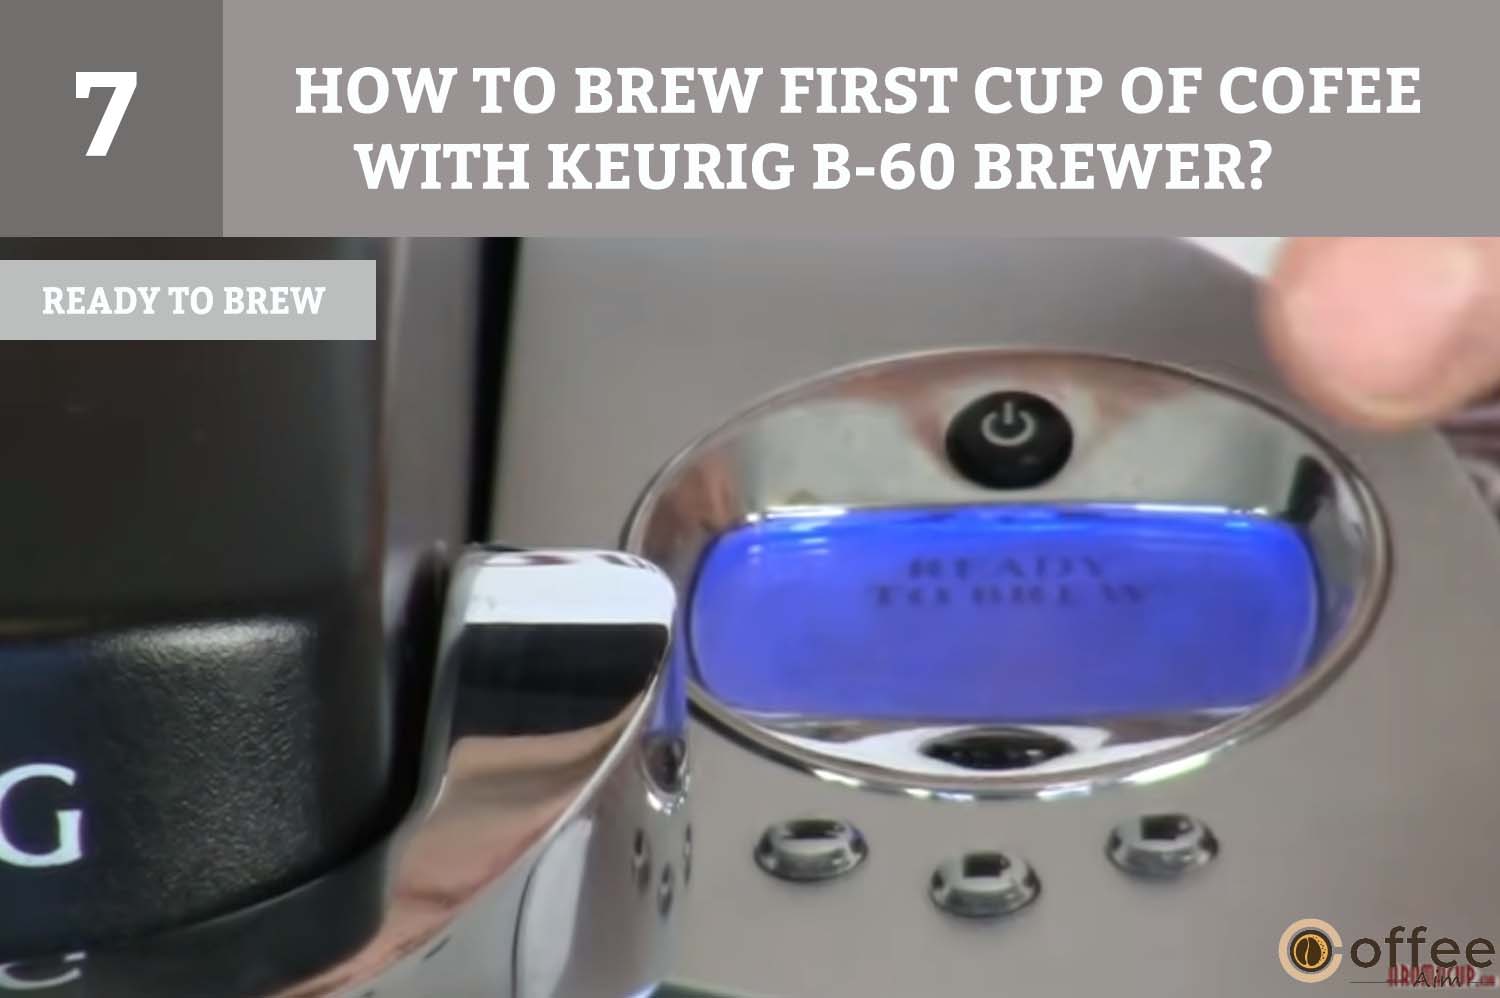 Select your desired brew size (Small Cup, Small Mug, or Large Mug) by pressing the corresponding button for your coffee, tea, or cocoa.